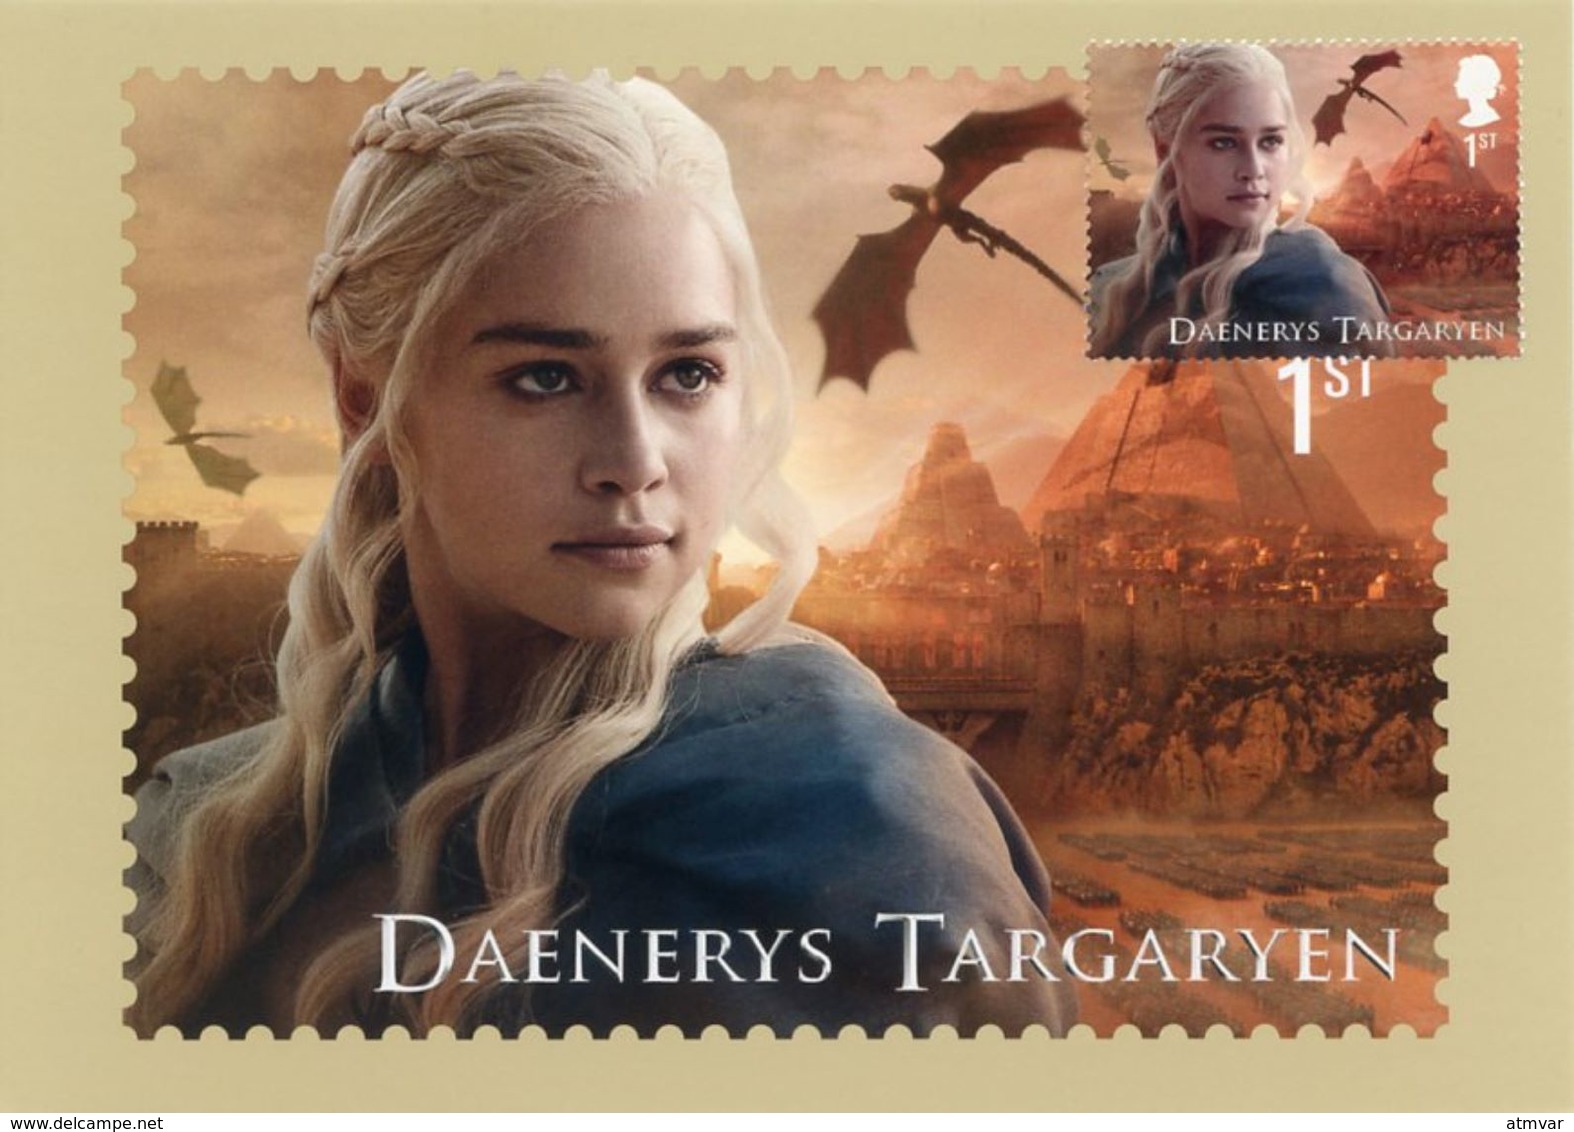 REINO UNIDO / UK (2018) - GAME OF THRONES Full set of postcards + stamps + Post&Go ATMs (see 32 scans) / Juego de Tronos